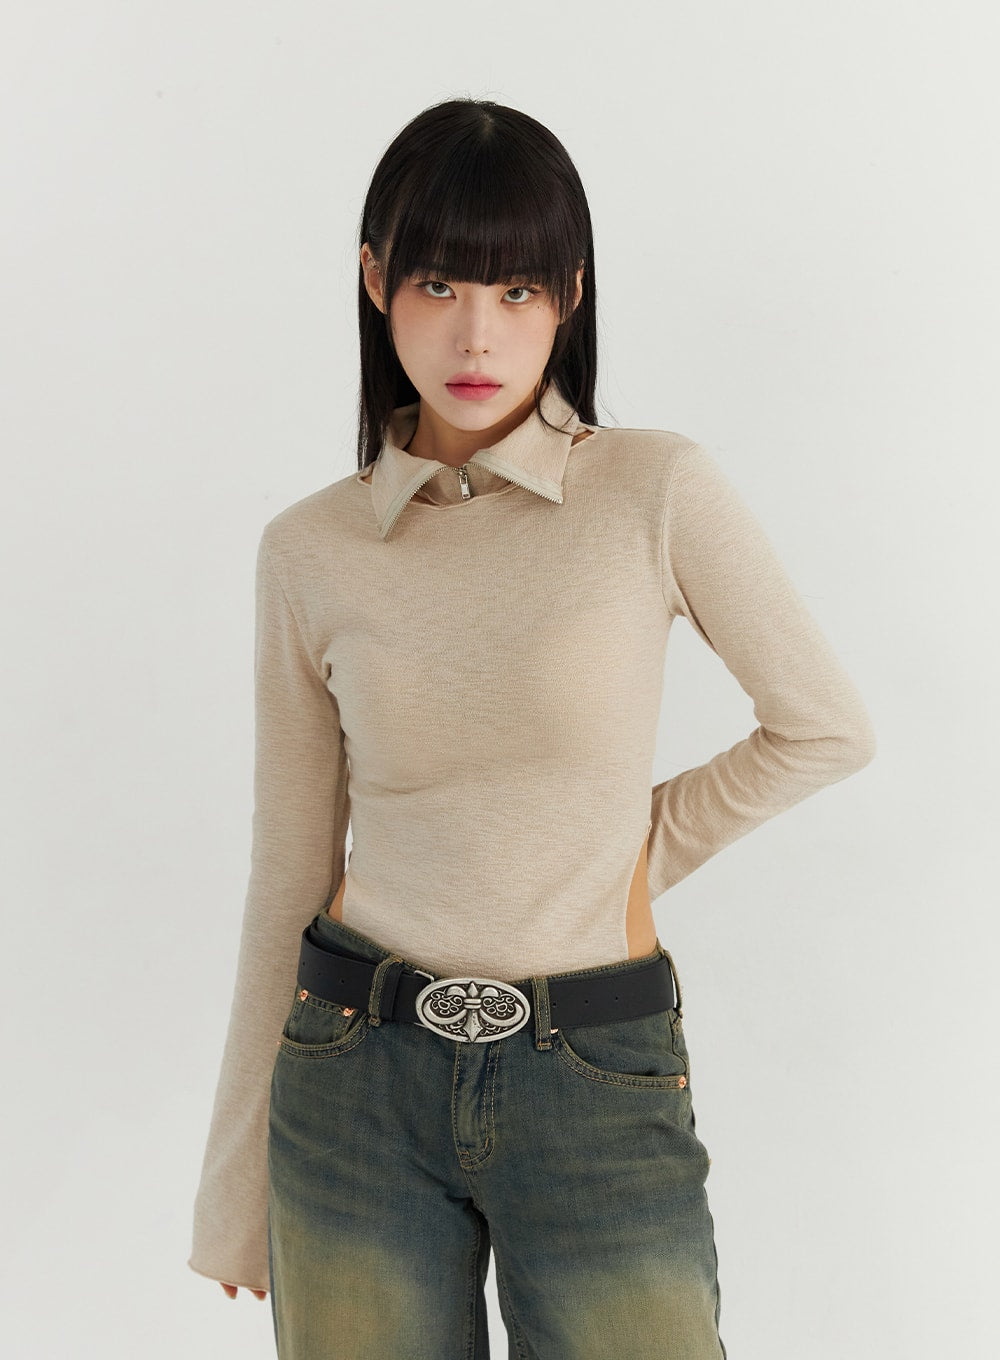 long-sleeve-top-with-high-neck-collar-co319